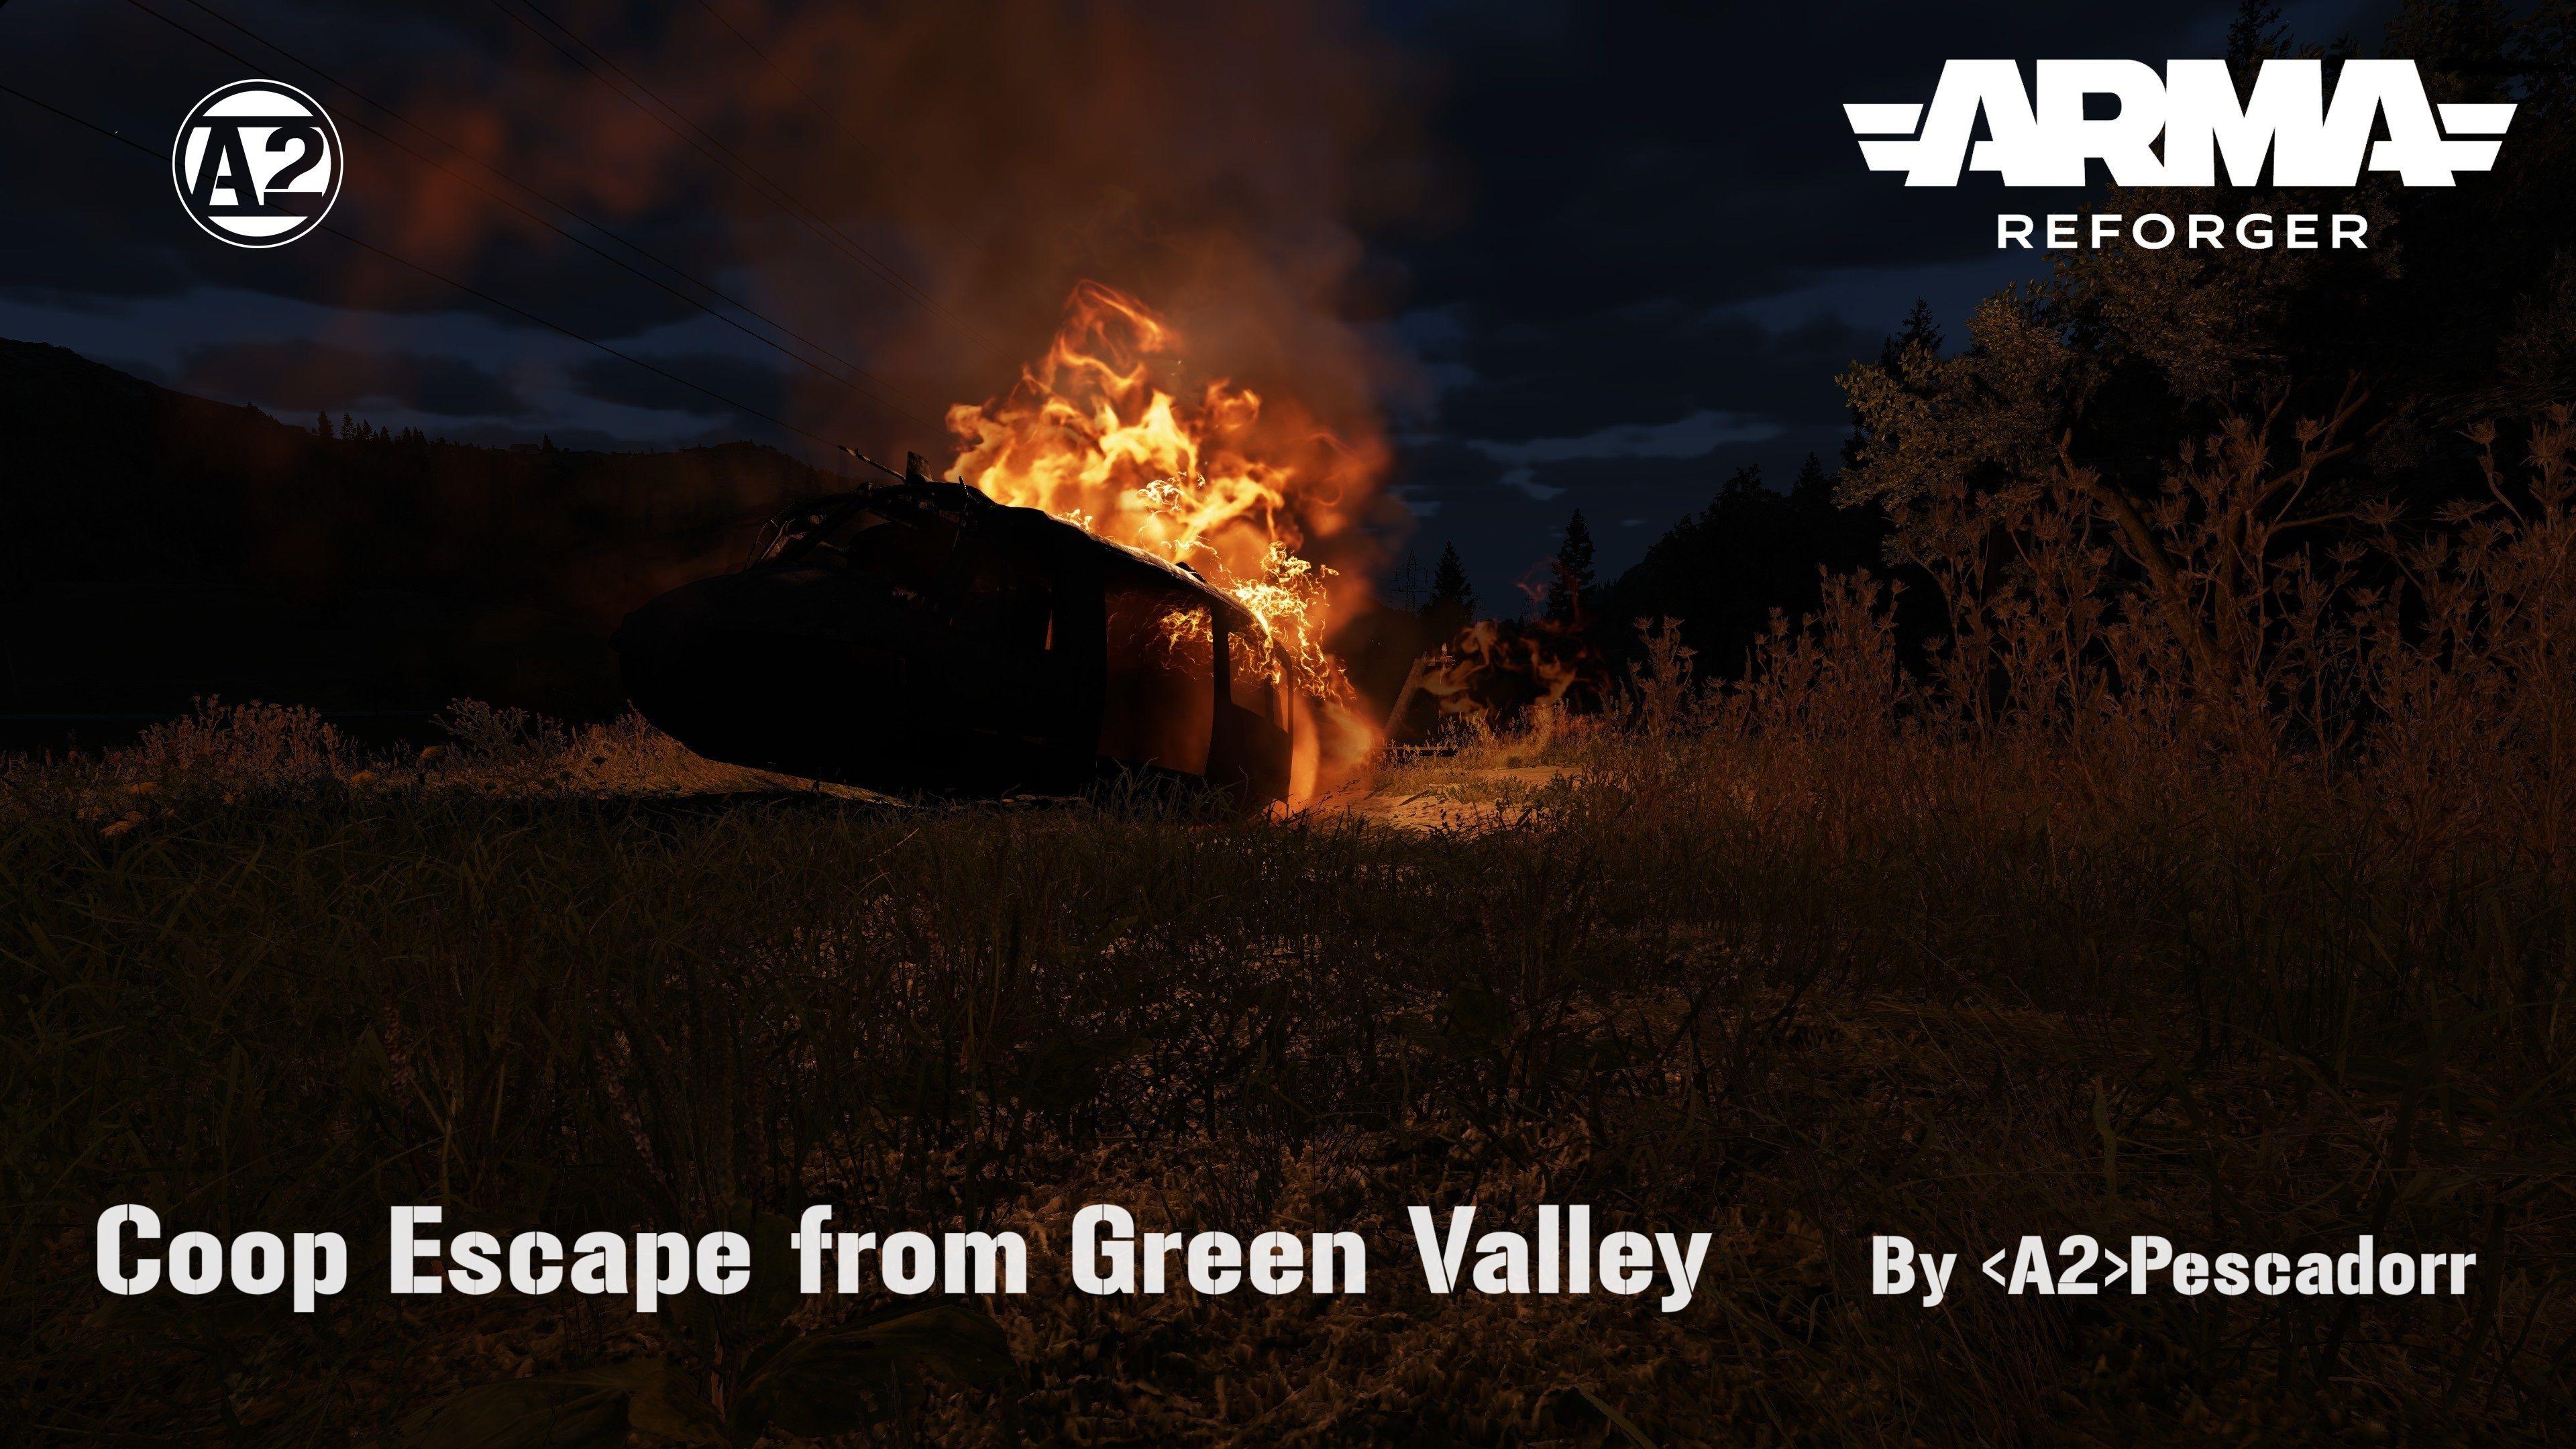 Coop Escape from Green Valley